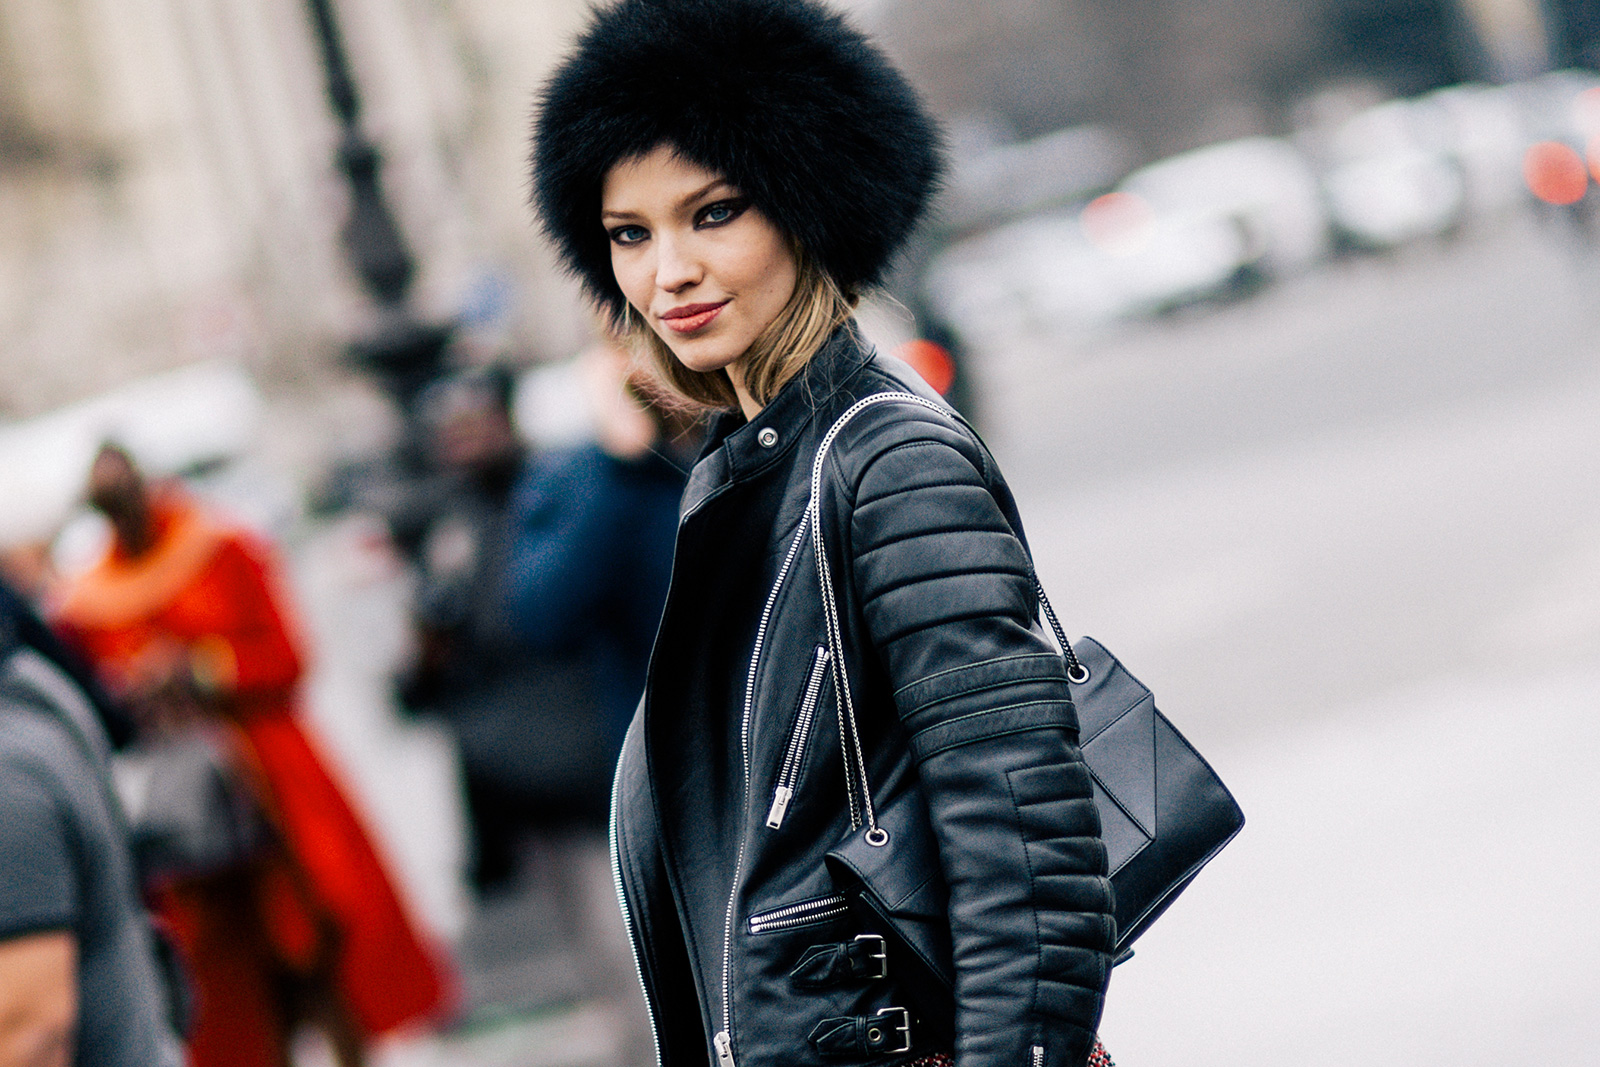 Sasha Luss wearing a leather jacket and fur hat after the Chanel Fall 2015 Fashion Show in Paris, France